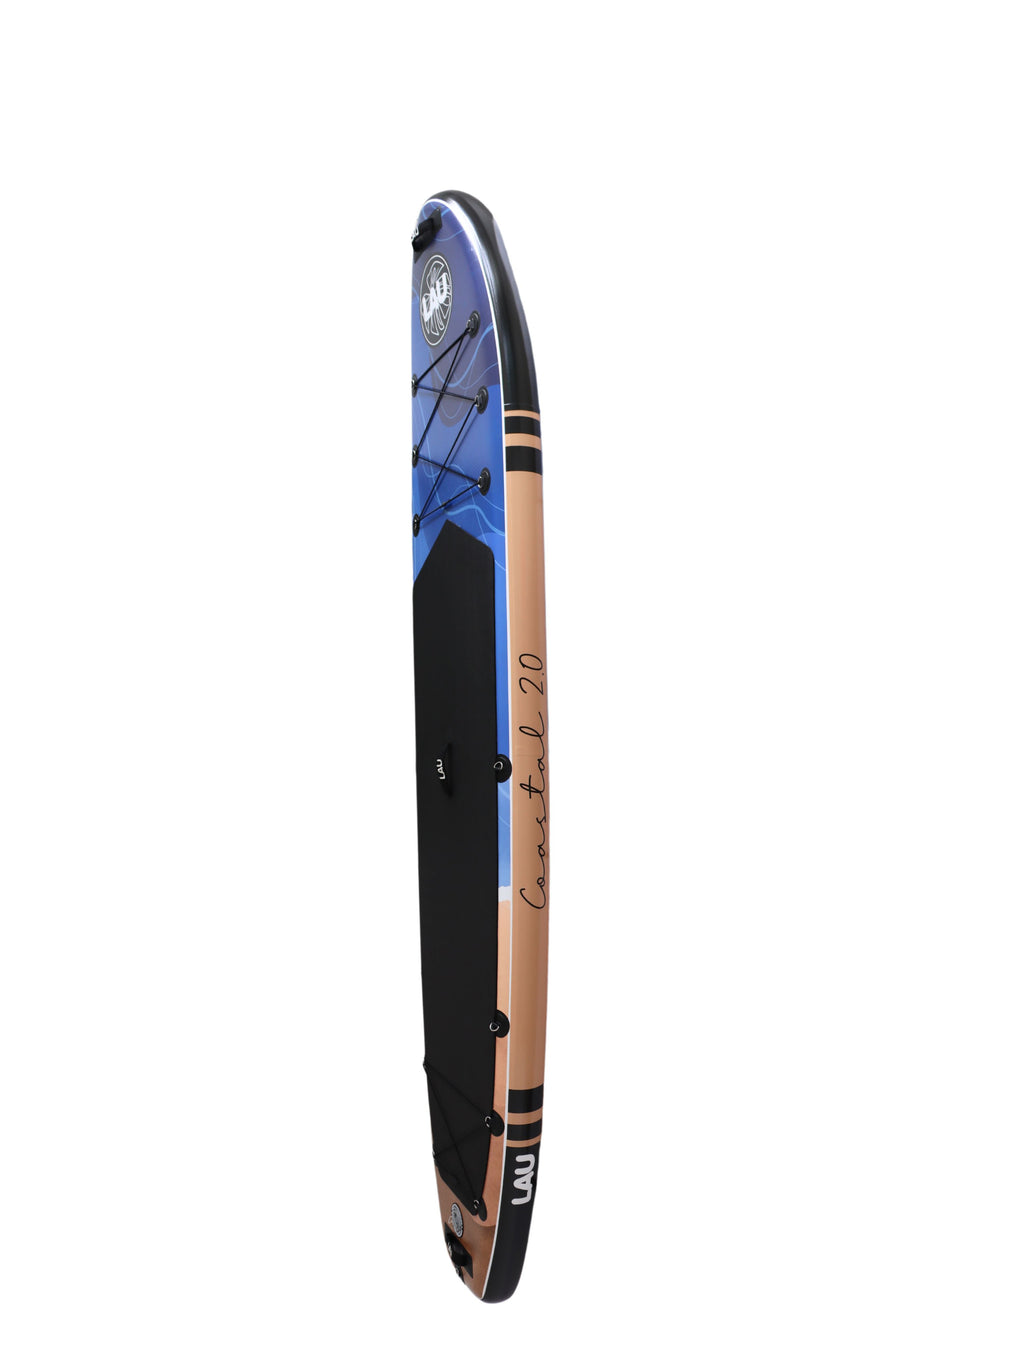 Coastal 2.0-11'6 All around- Paddle board gonflable